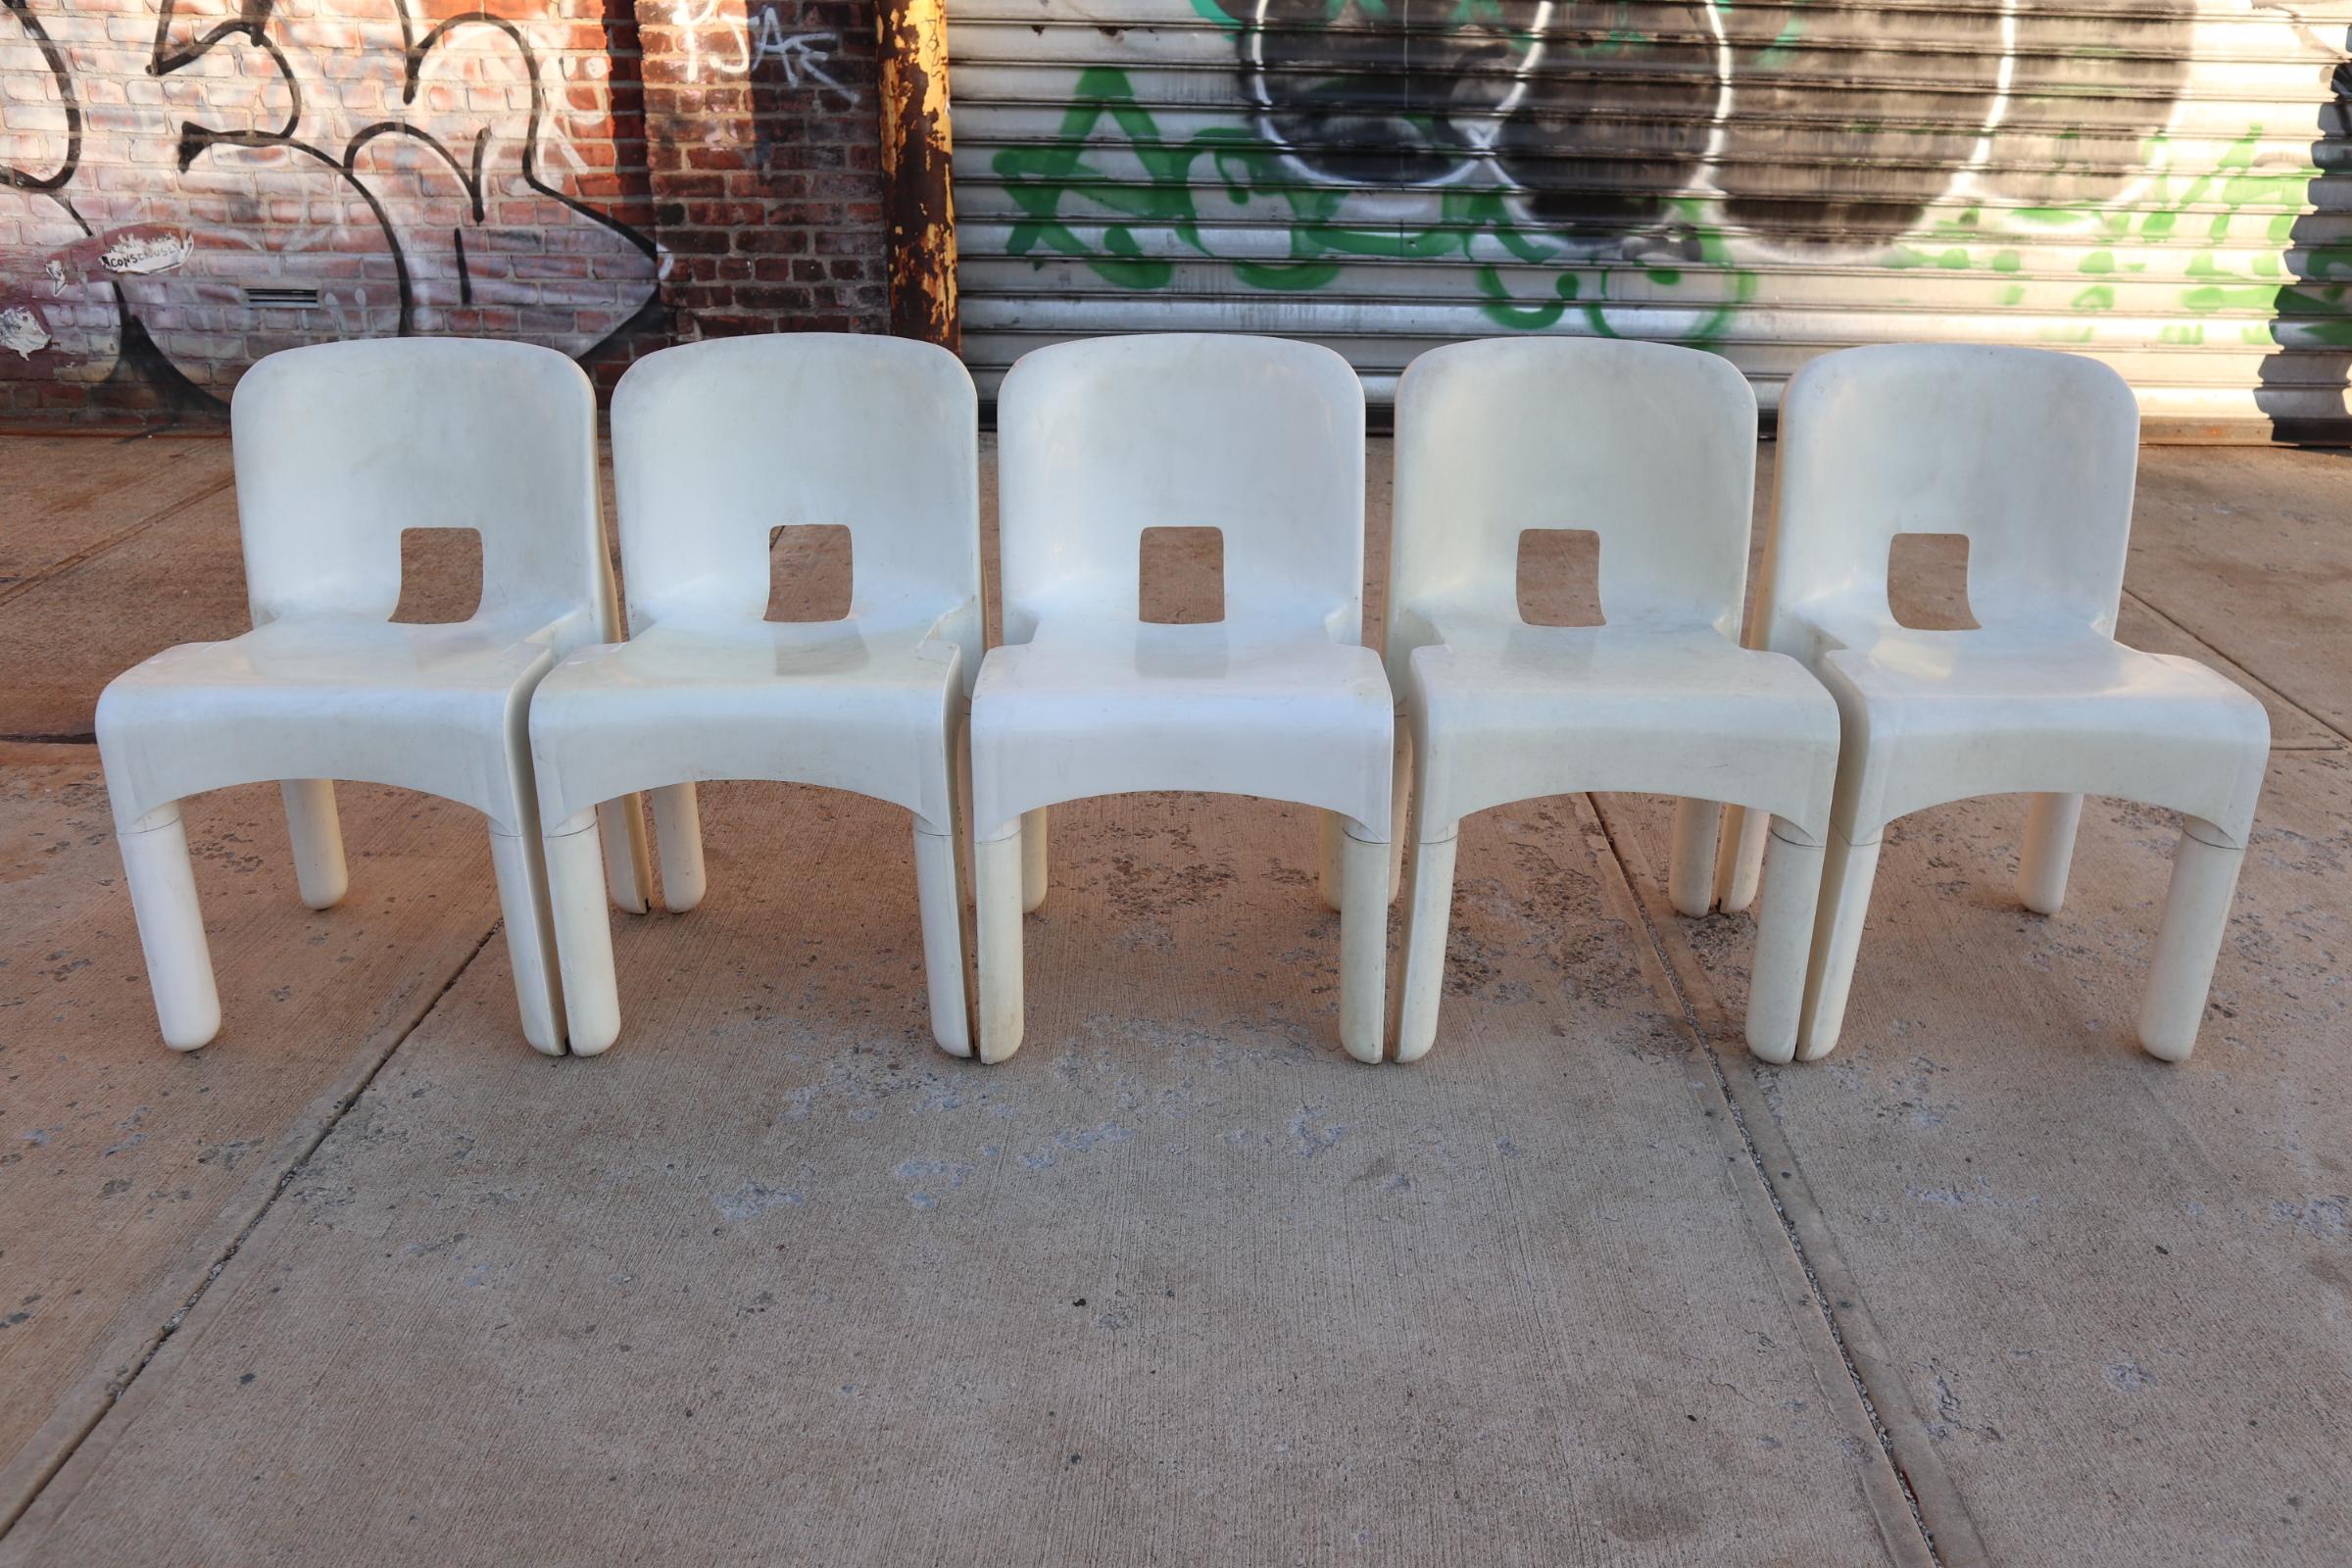 Set of five plastic chairs designed by Joe Colombo for Kartell. Chairs embossed with manufacturer and designer names. Chairs stack and are easy to clean. Great for indoor or outdoor use. All structurally sound with normal wear for age. No structural